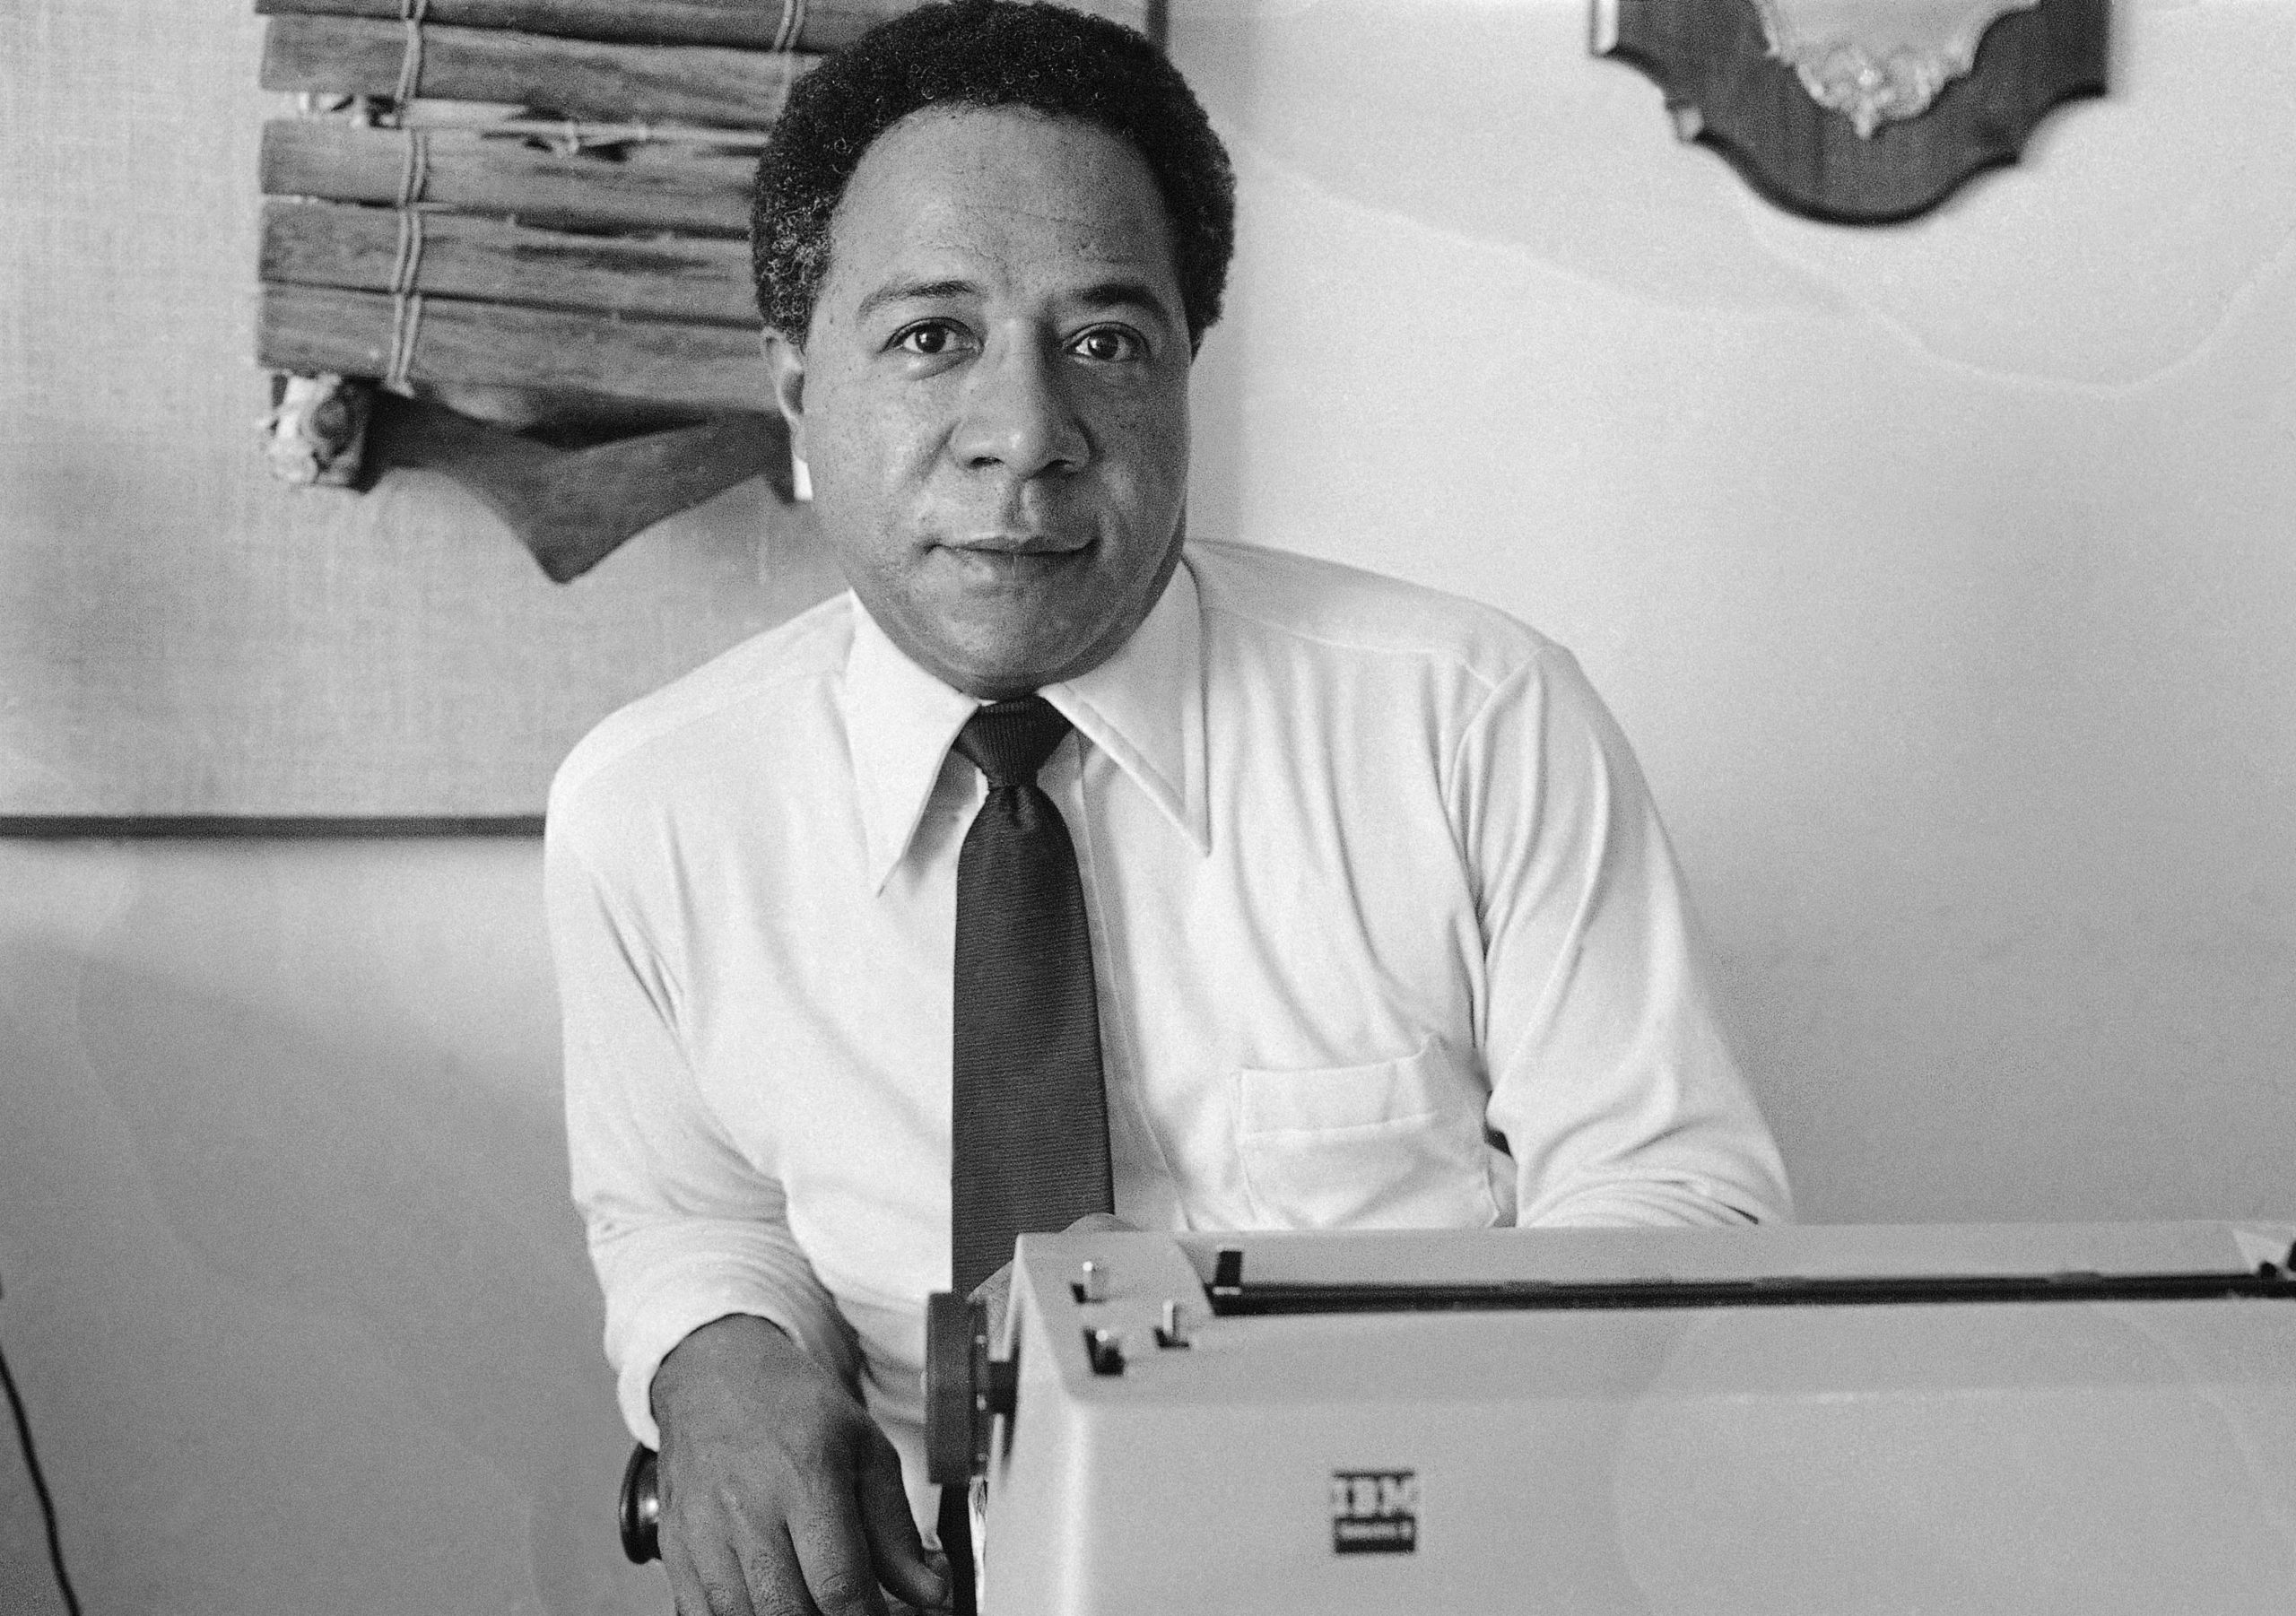 Author Alex Haley was born in New York on this day in 1921